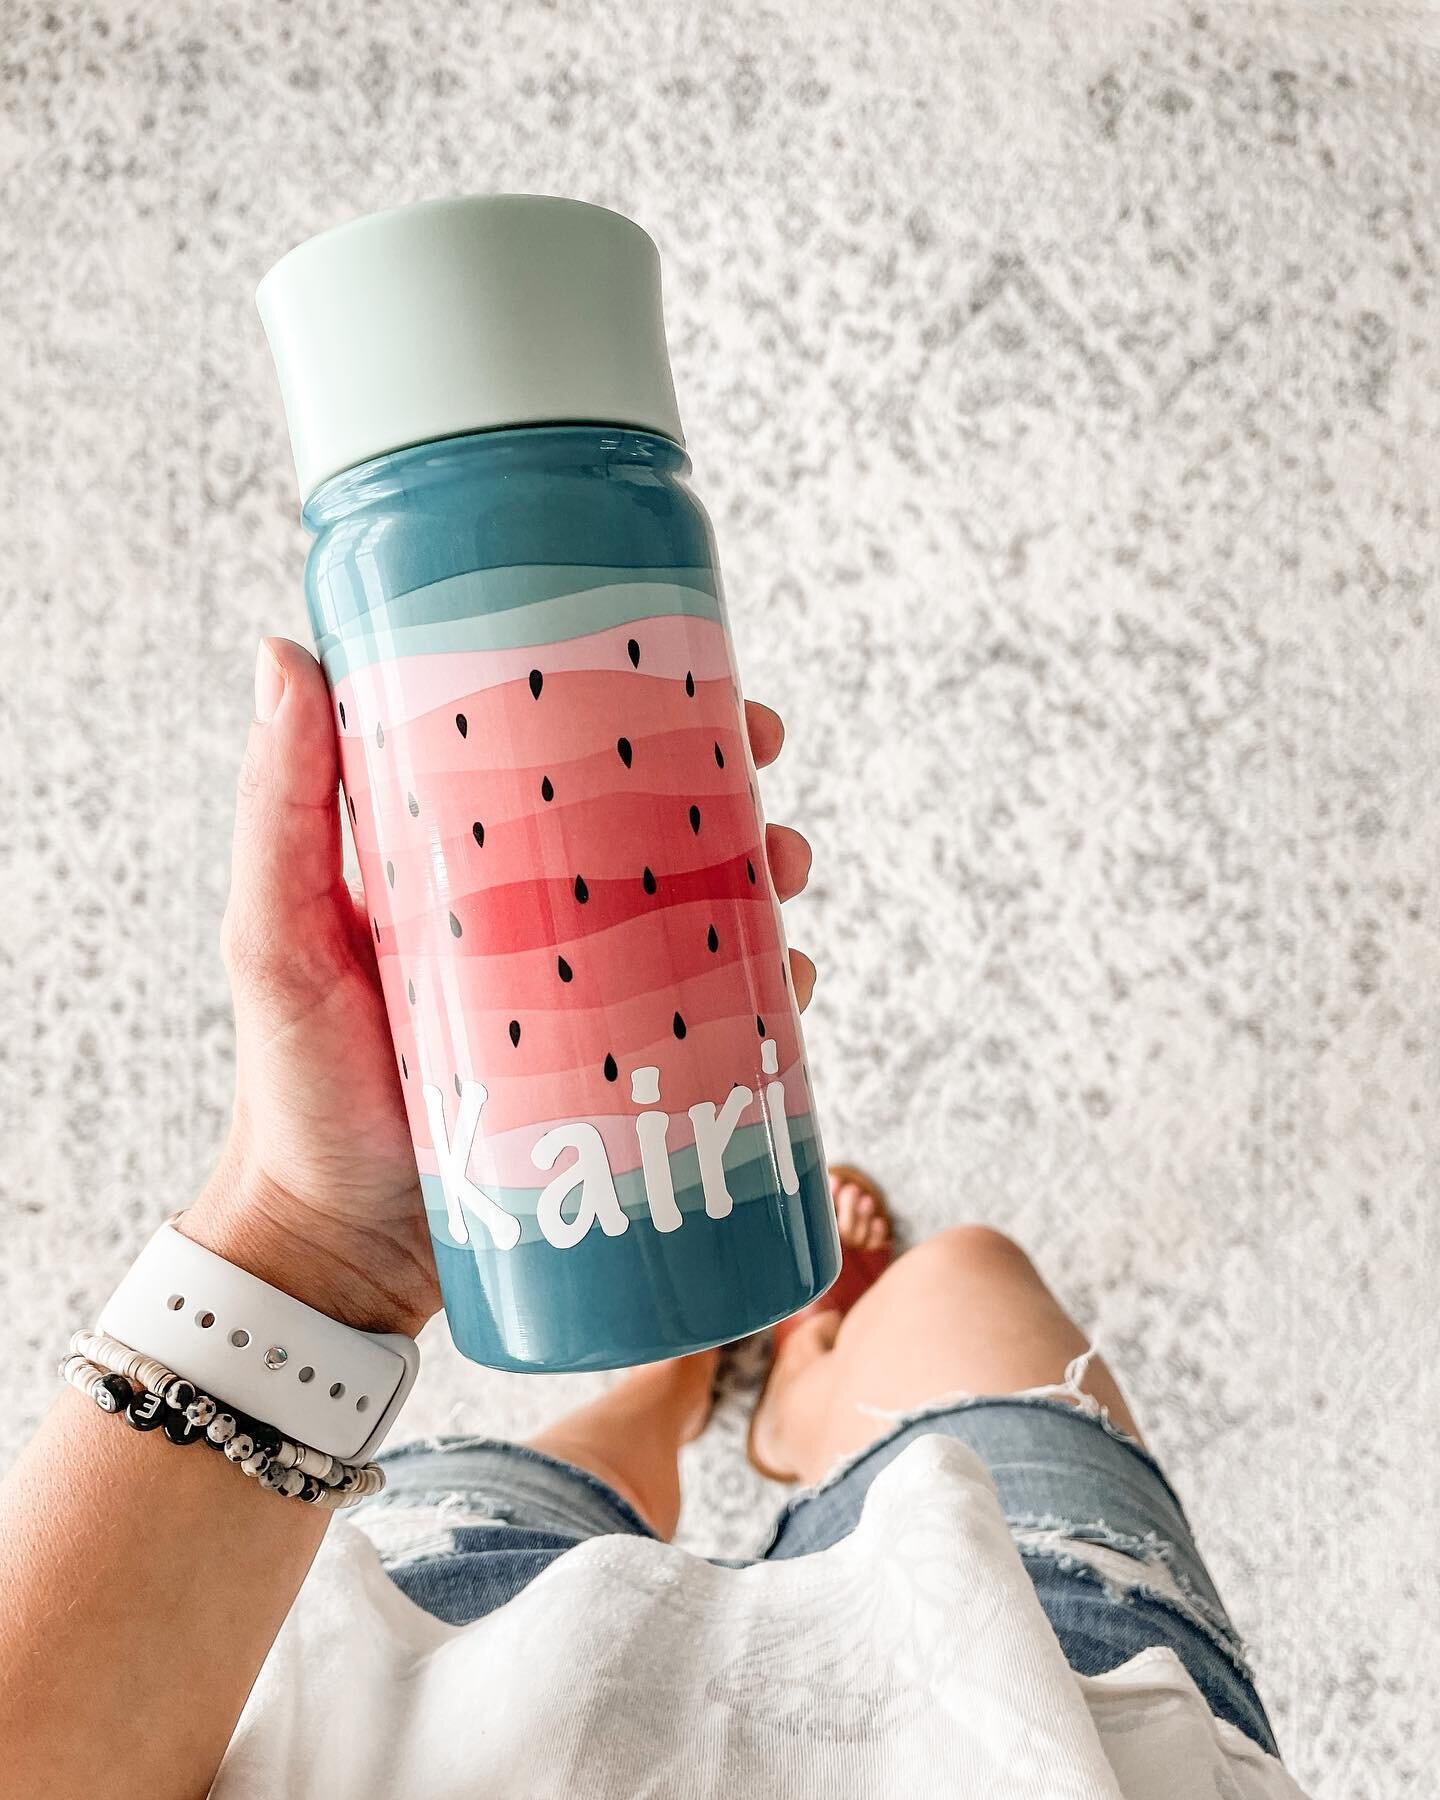 heads up! 🍉 @walmart has the cutest kids metal thermoses right now that are easily customizable with your @officialcricut 🍉 

for step by step tutorials check out the blog &mdash; link in bio! I share all the best tips &amp; tricks as well as mater